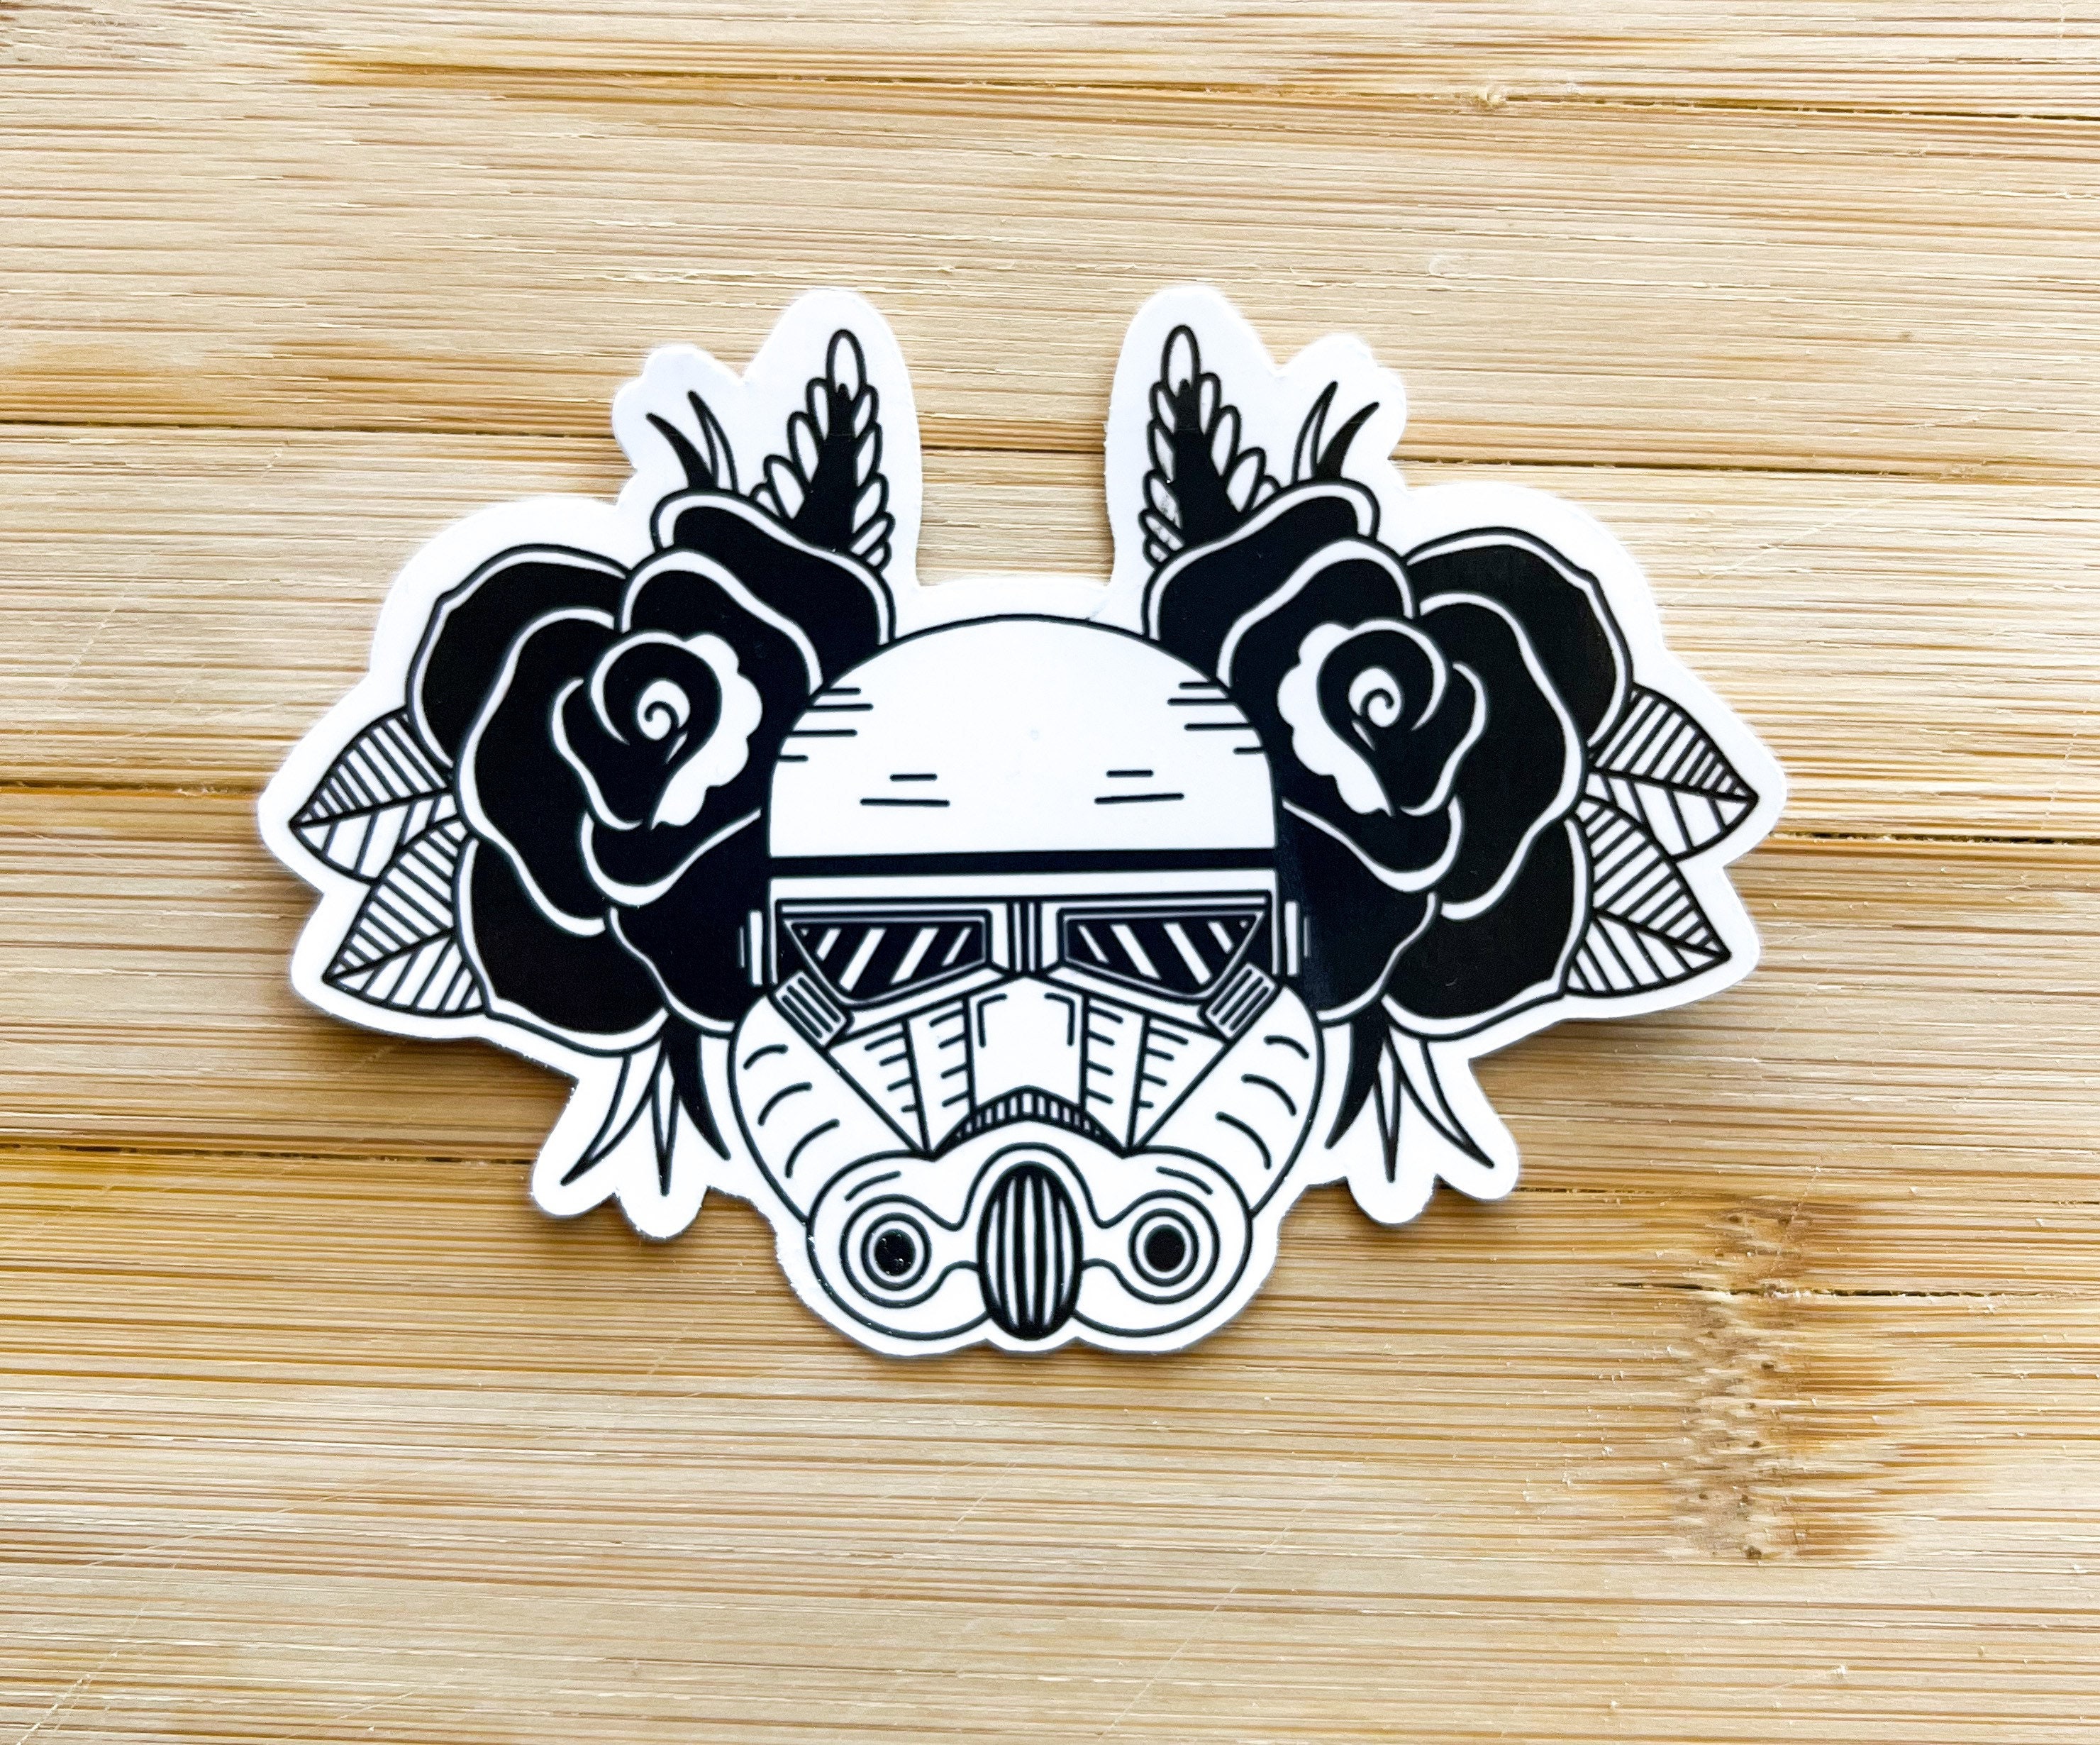 Traditional Tattoo American Etsy Sticker, Laptop Sticker - Sticker Starwars Starwars Stormtrooper Decal, Stickers, Traditional Nerdy Flash,